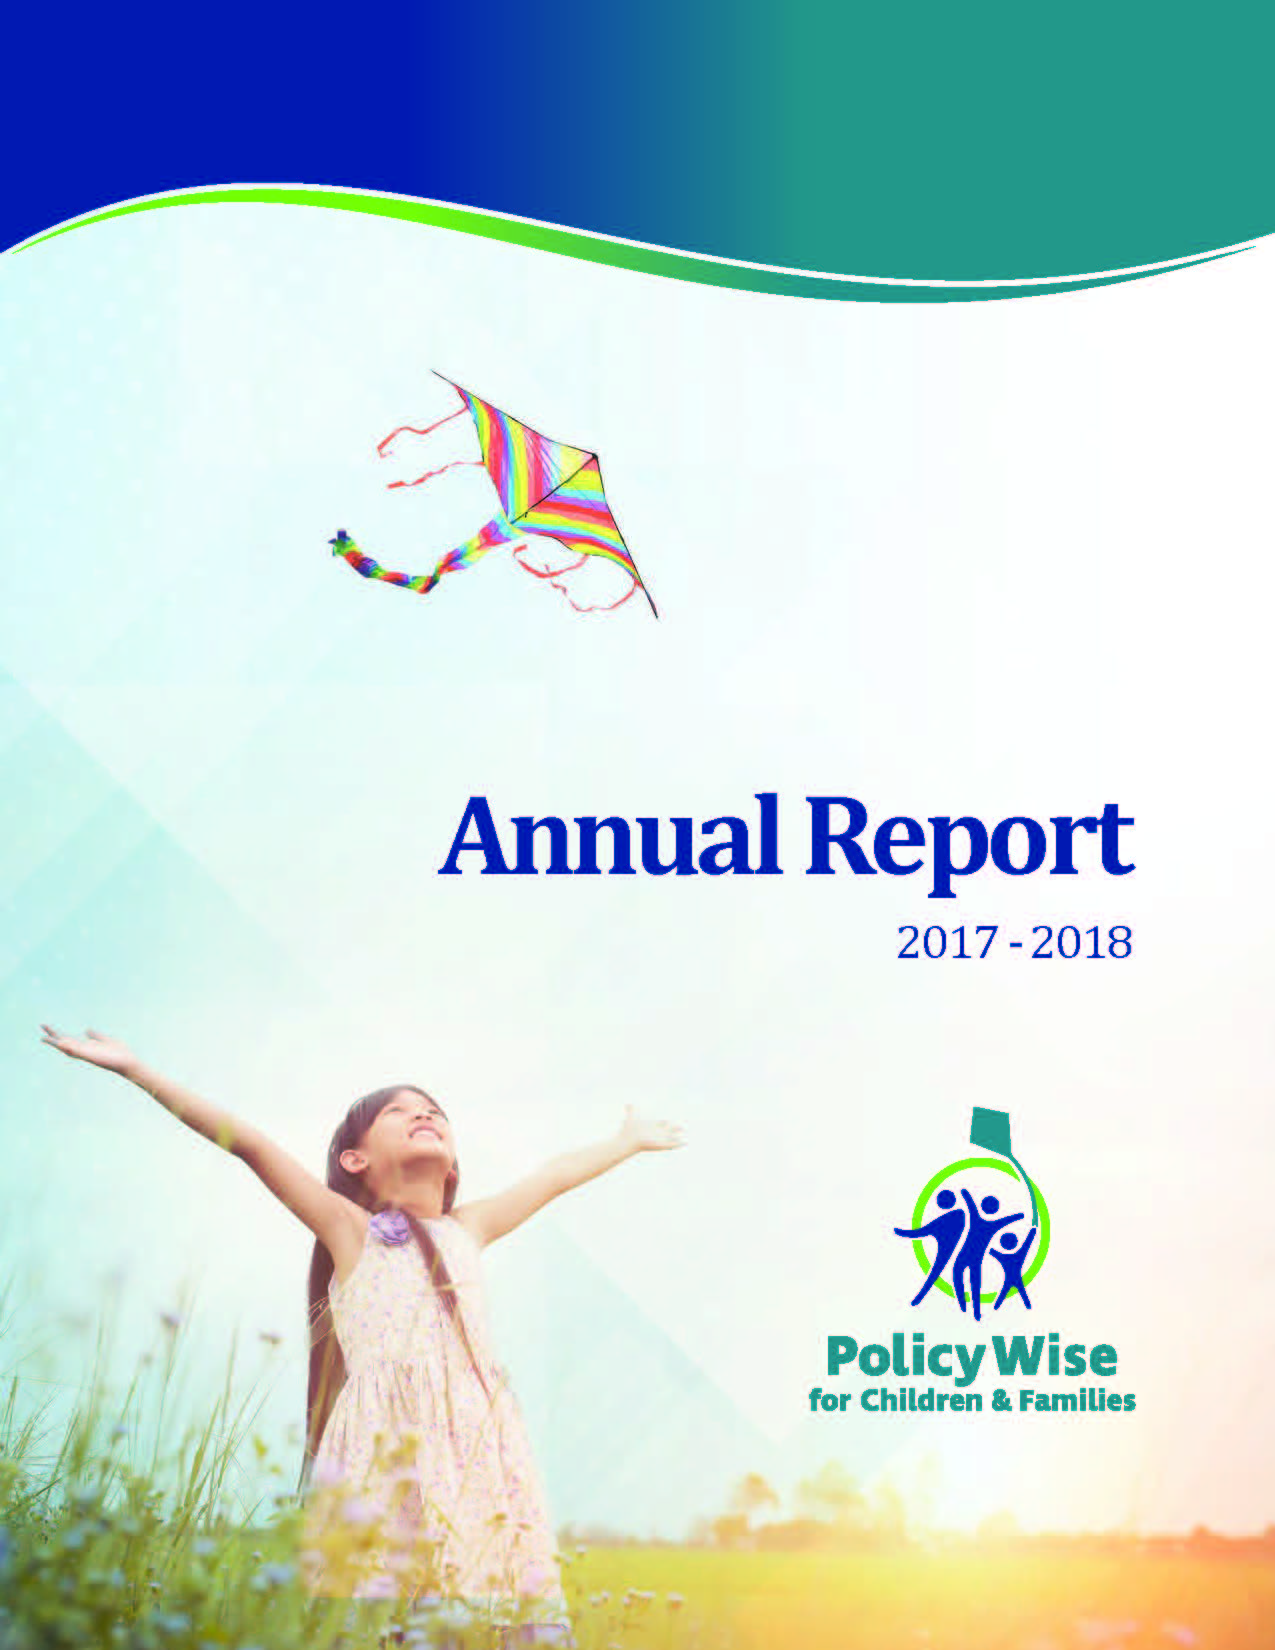 Cover of PolicyWise's 2017-2018 Annual Report.